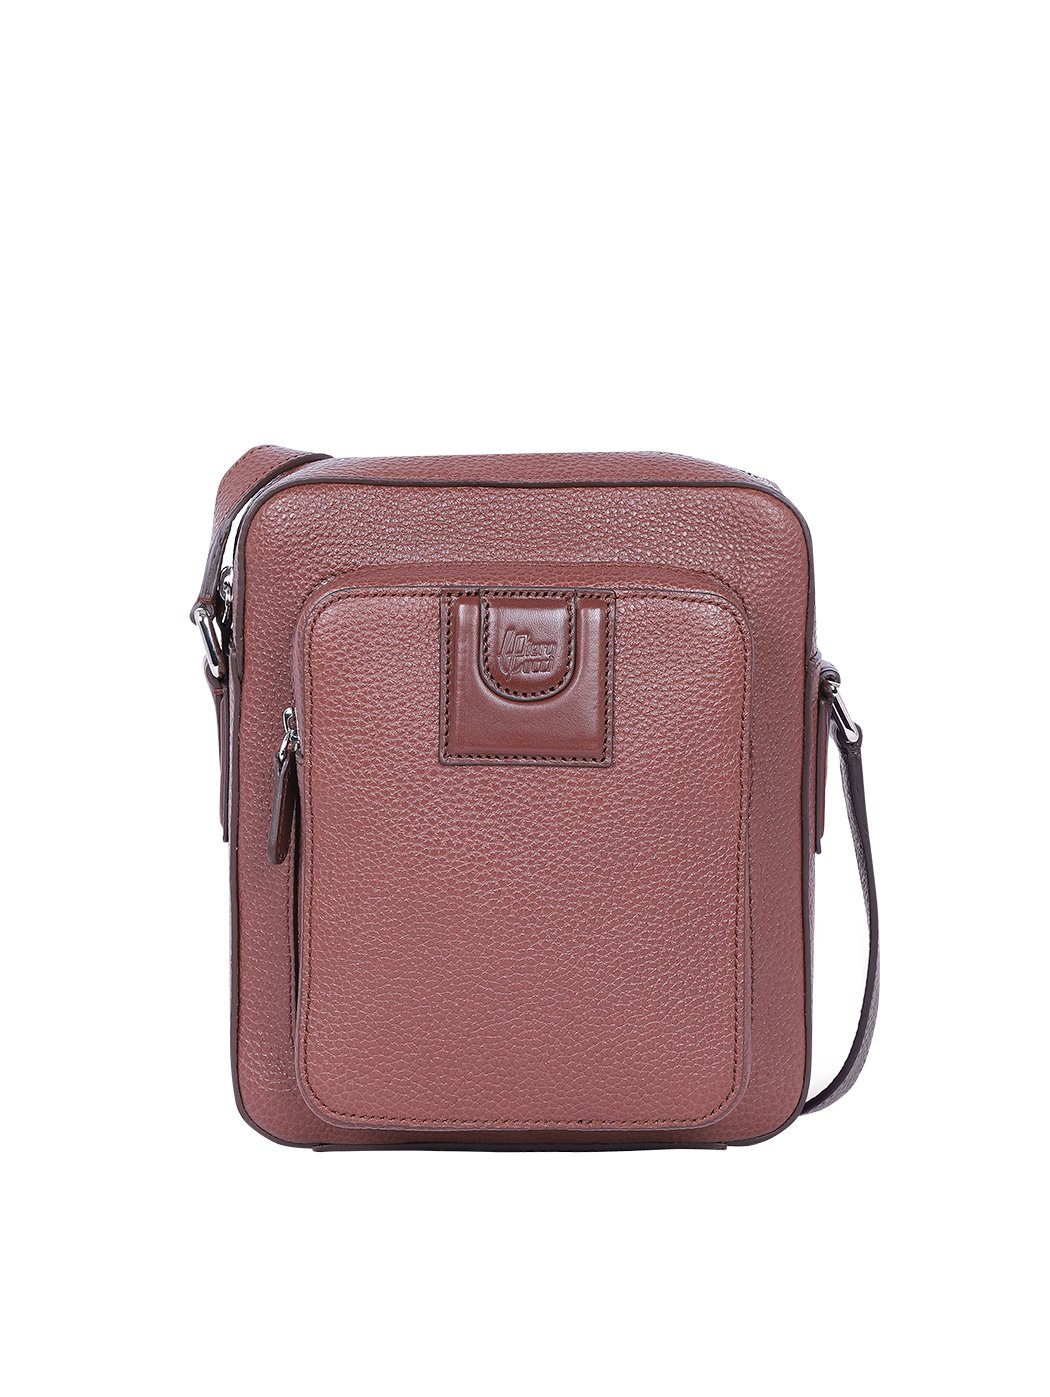 Crossbody Double Pocket Leather Bag Brown